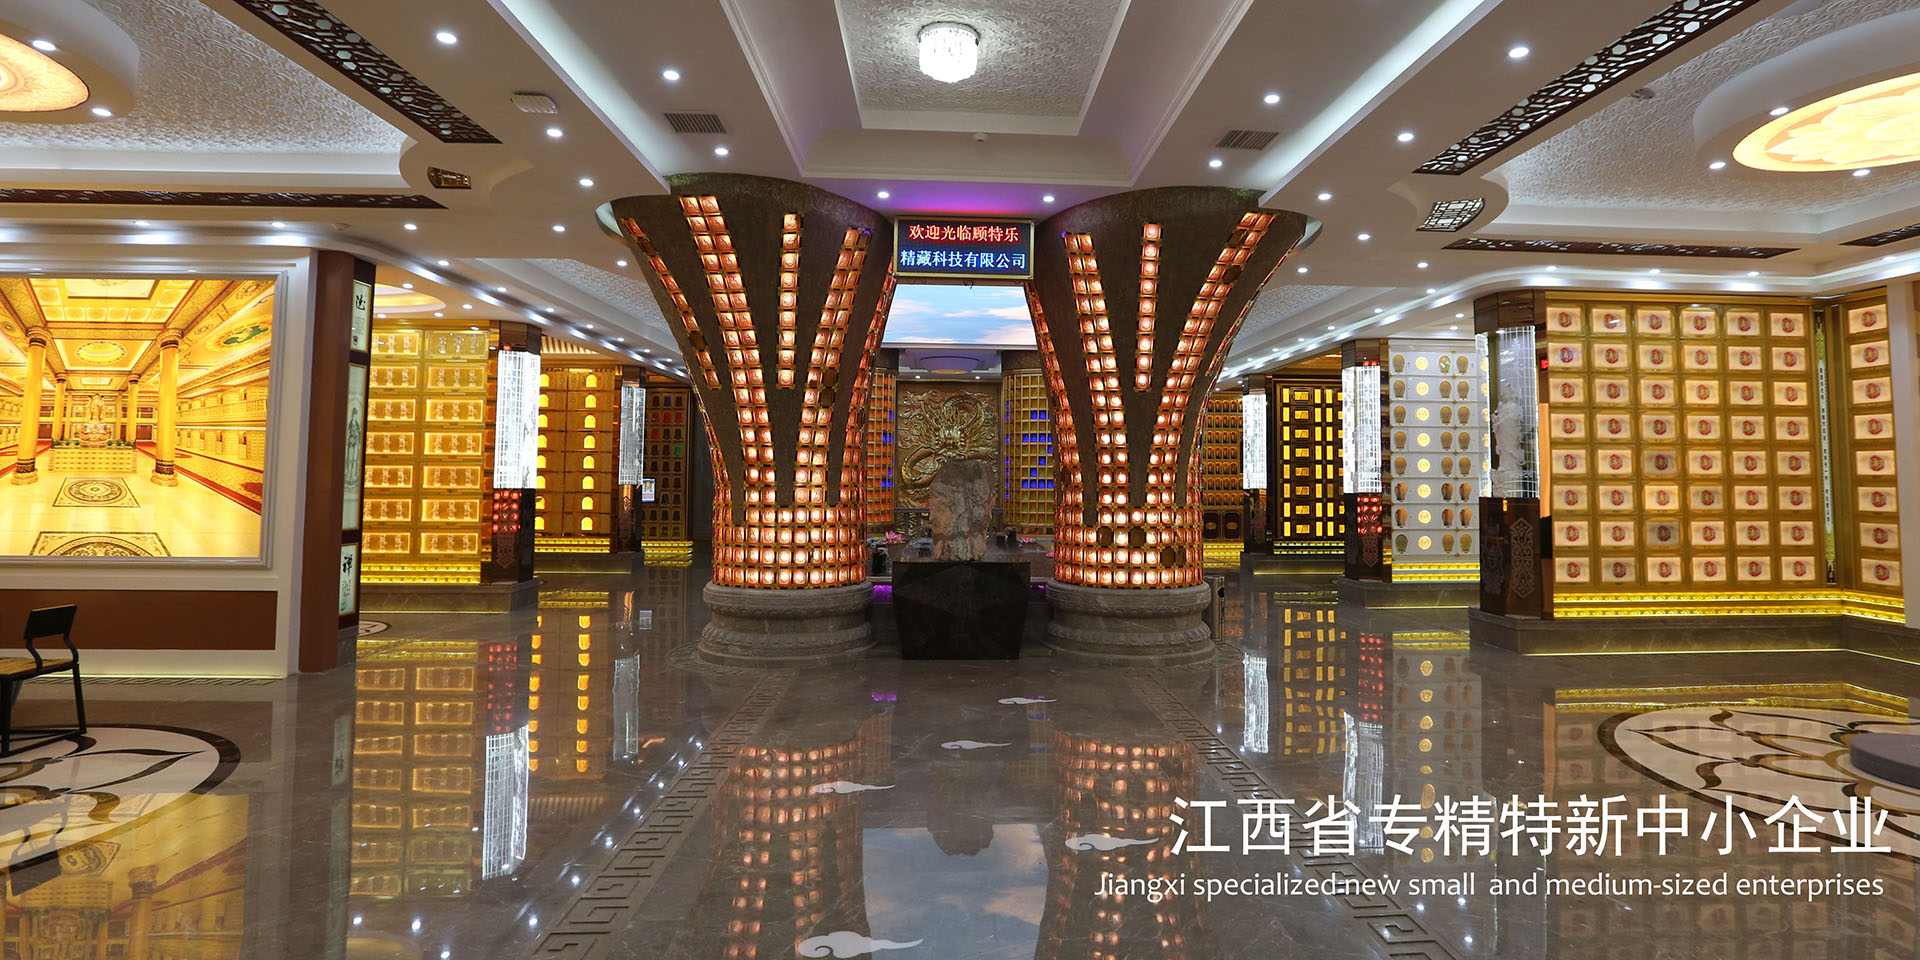 Jiangxi Province specialized, special and new small and medium-sized enterprises